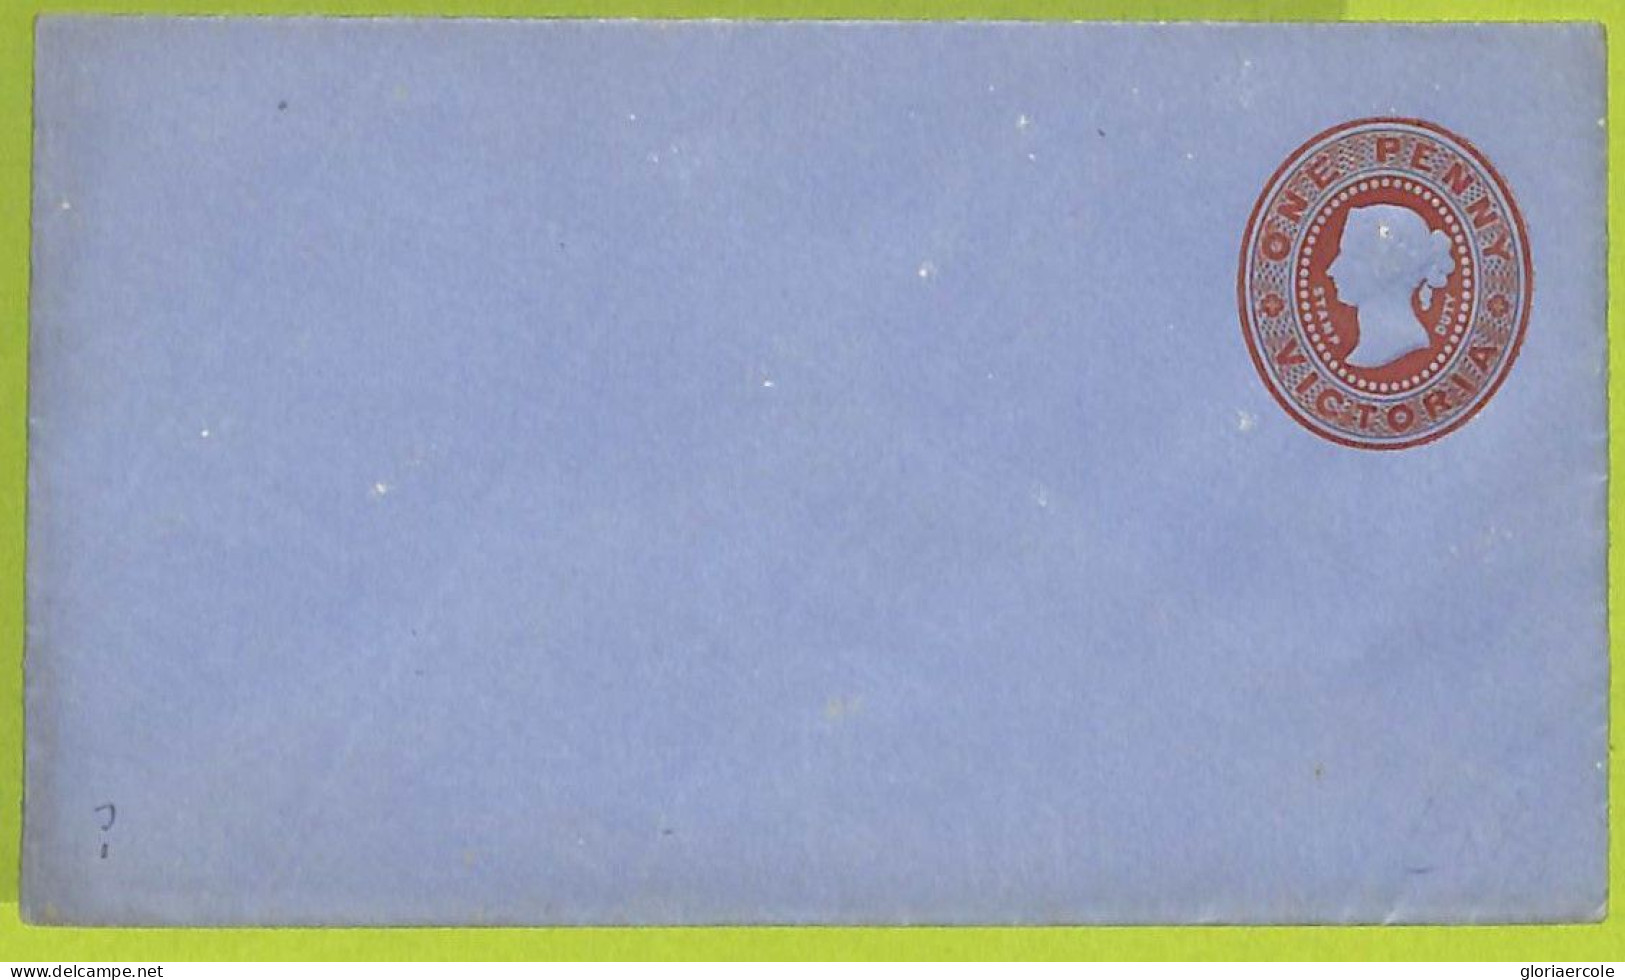 40206 - VICTORIA - Postal History - STATIONERY COVER Printed To Order BLUE LAID PAPER 1 P - 136*78 - Brieven En Documenten